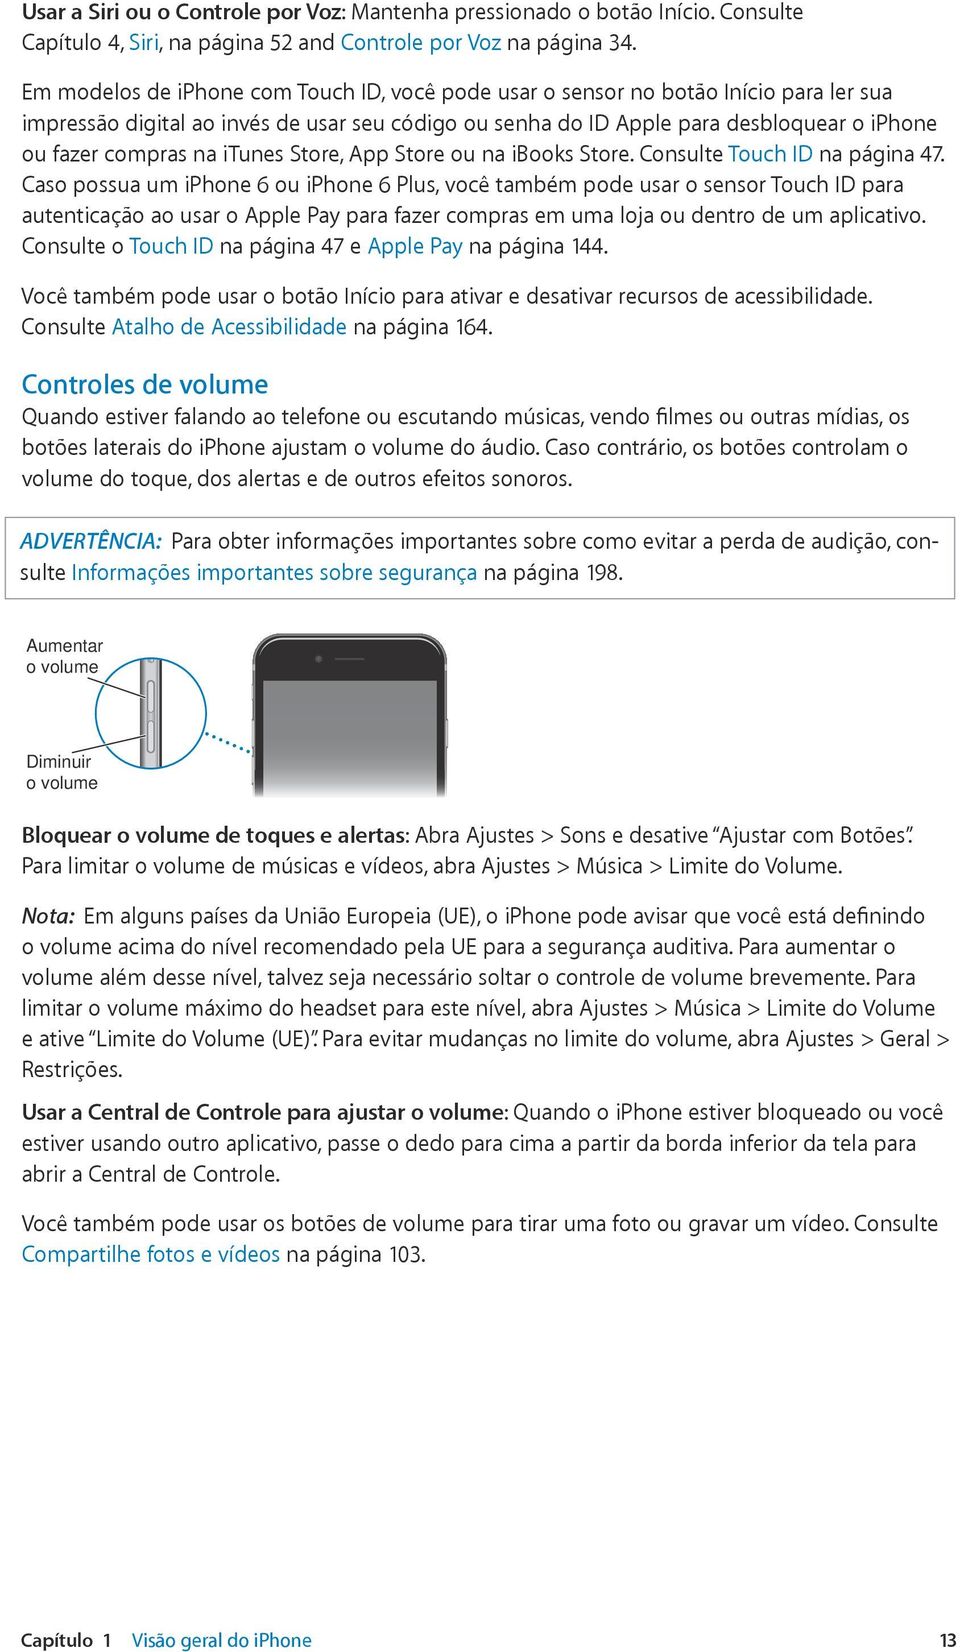 na itunes Store, App Store ou na ibooks Store. Consulte Touch ID na página 47.